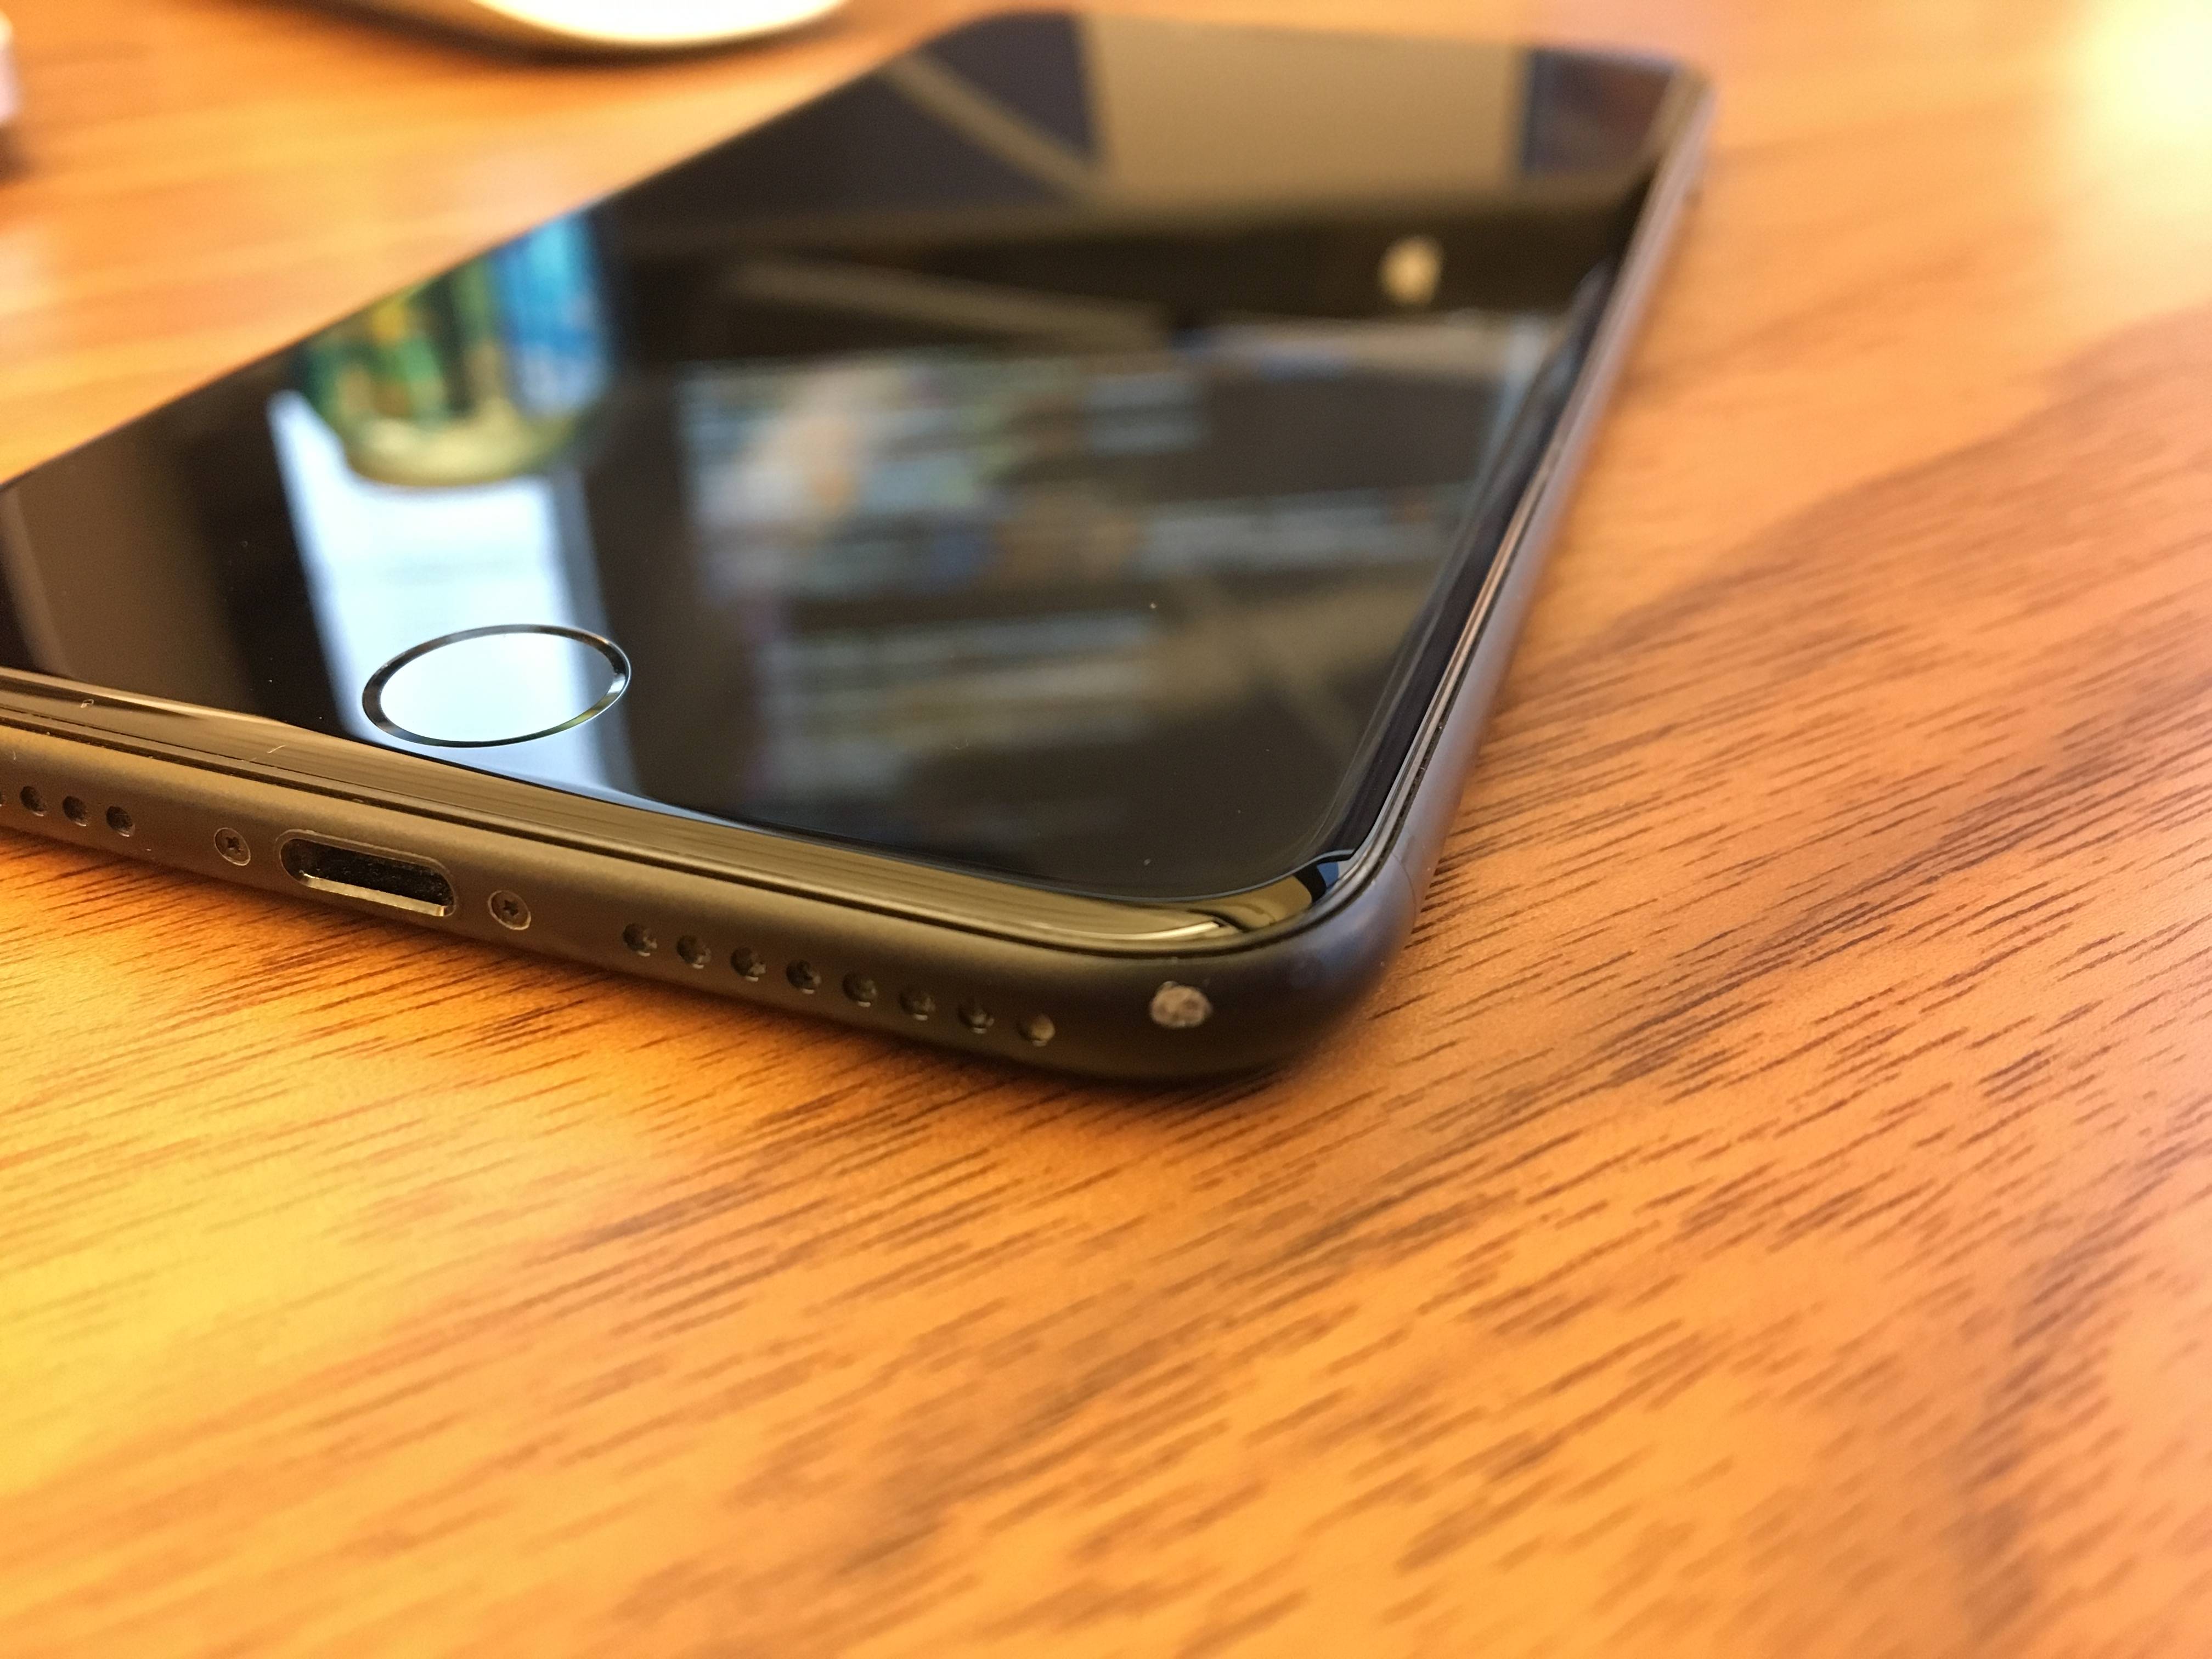 Some Matte Black Iphone Users Are Complaining Of Paint Chipping Issues